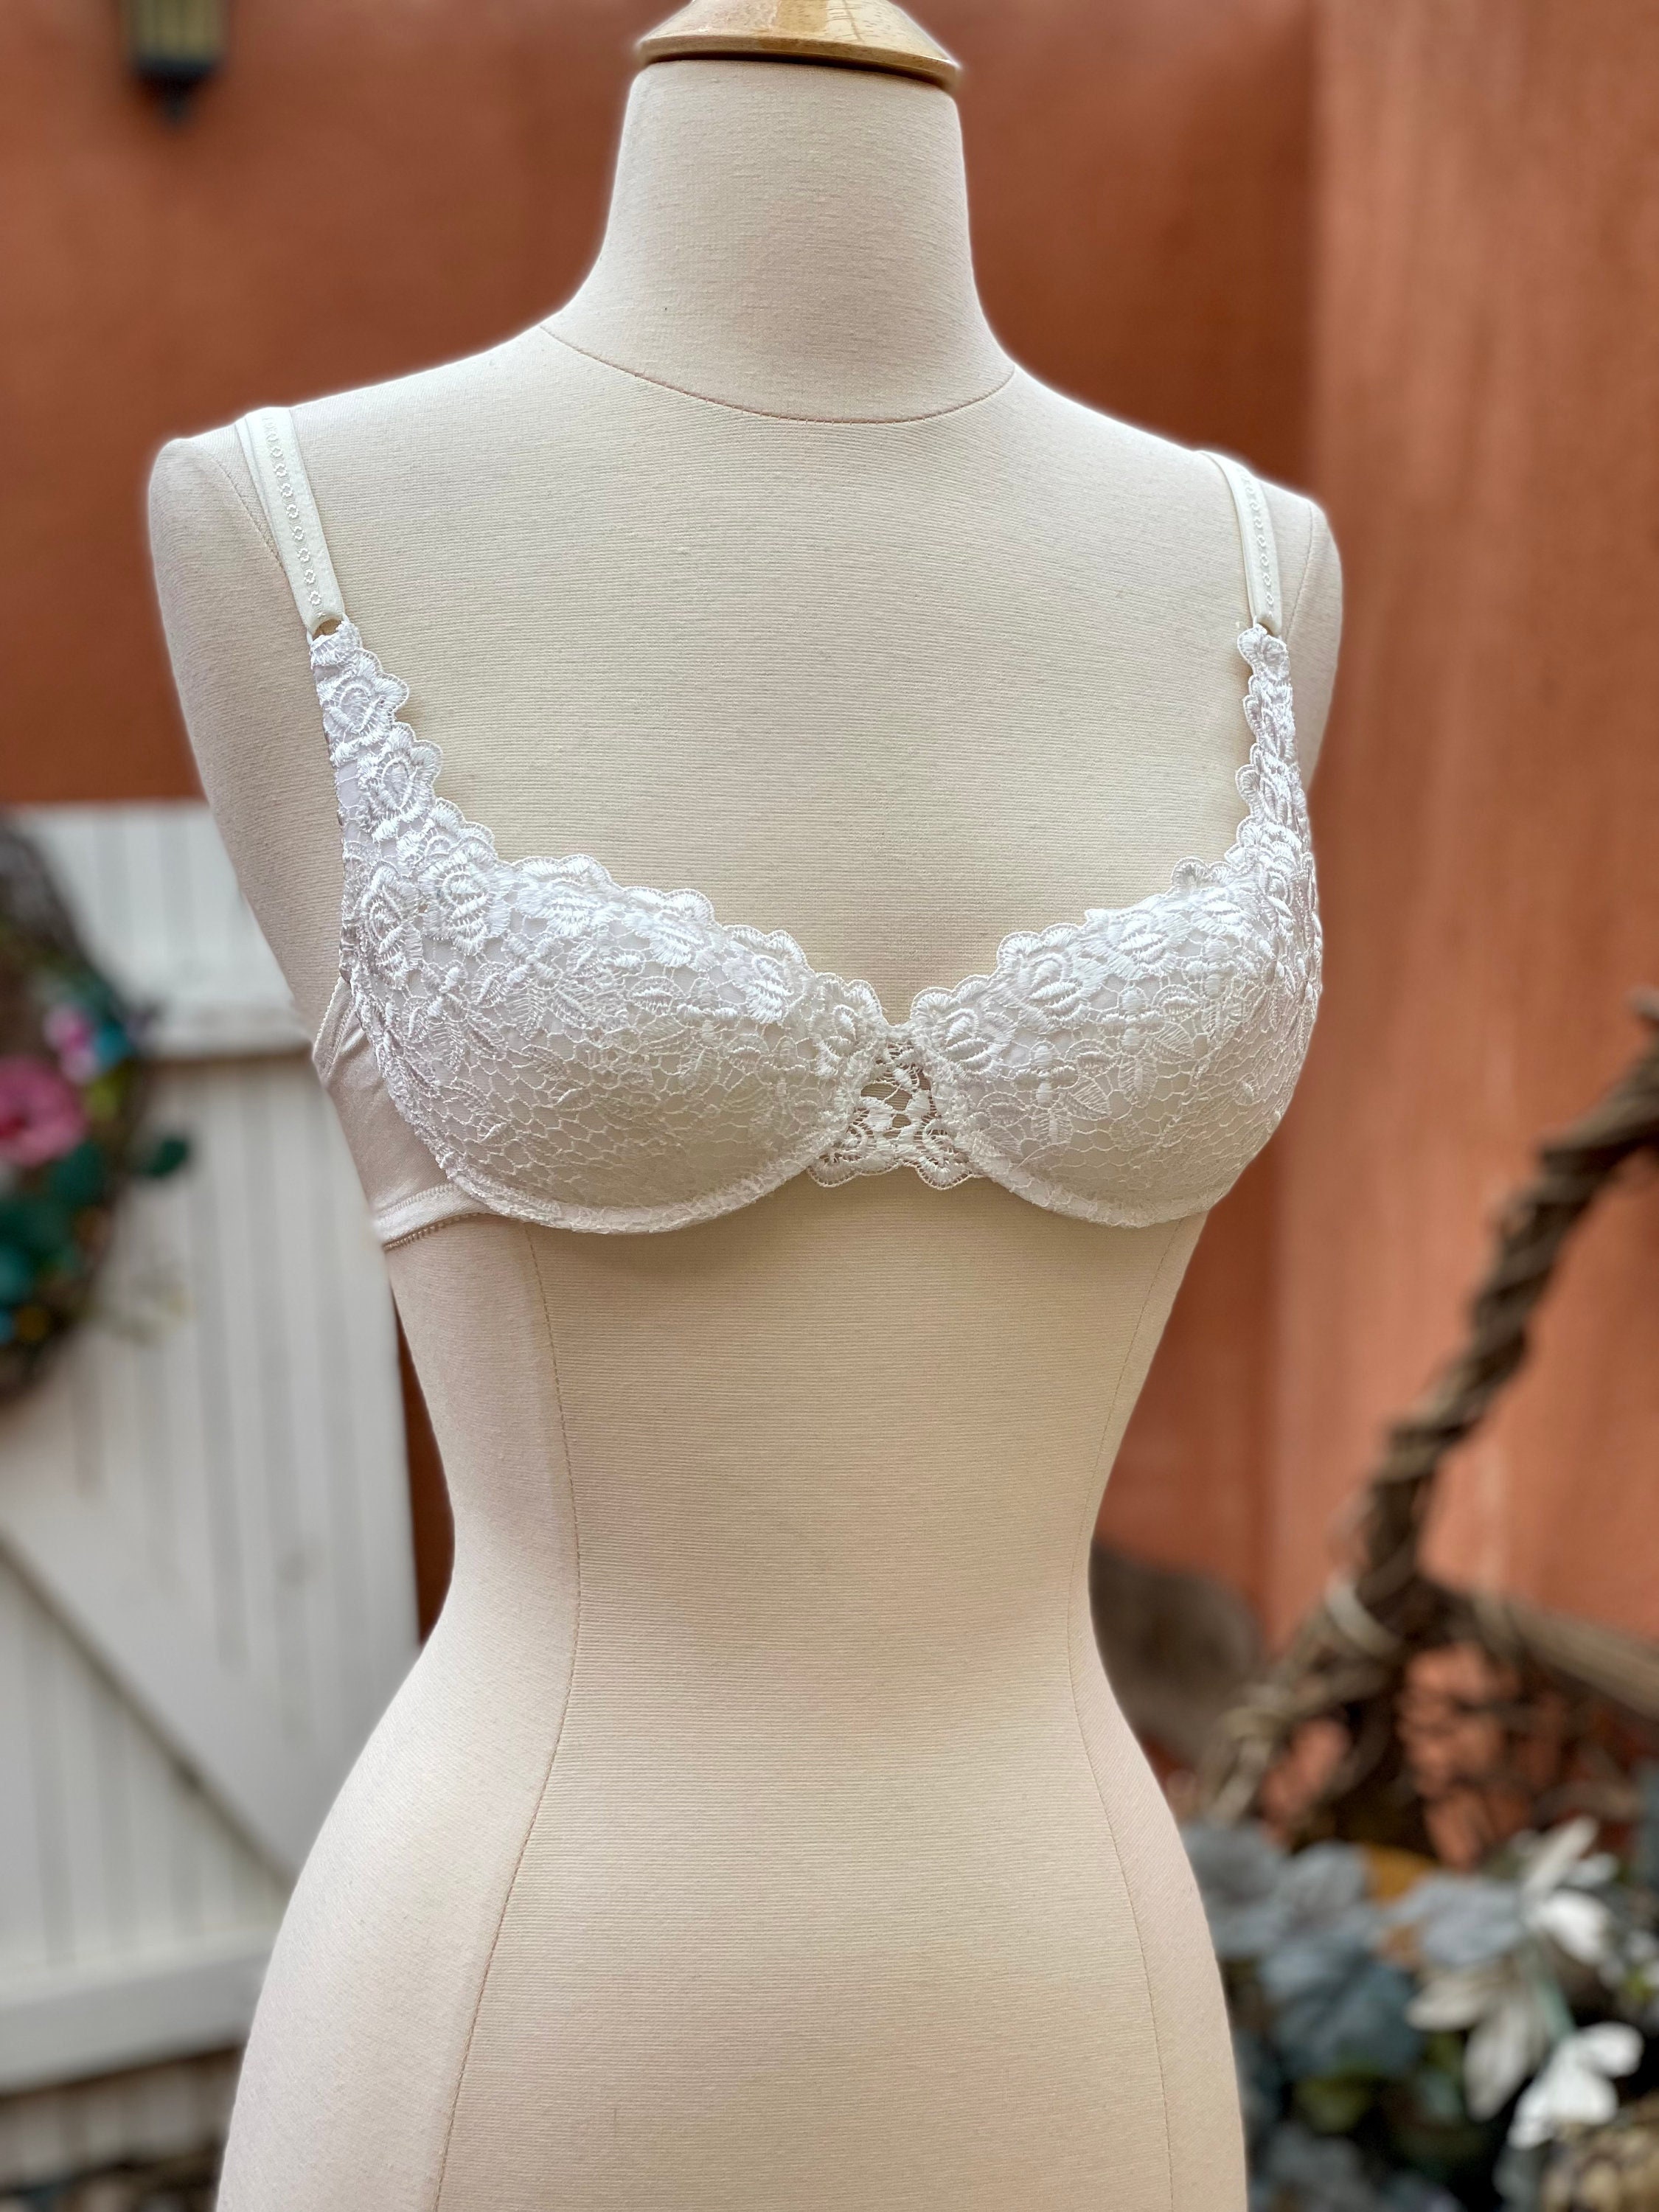 Vintage Victoria's Secret White Lace Miracle Bra NEW OLD STOCK